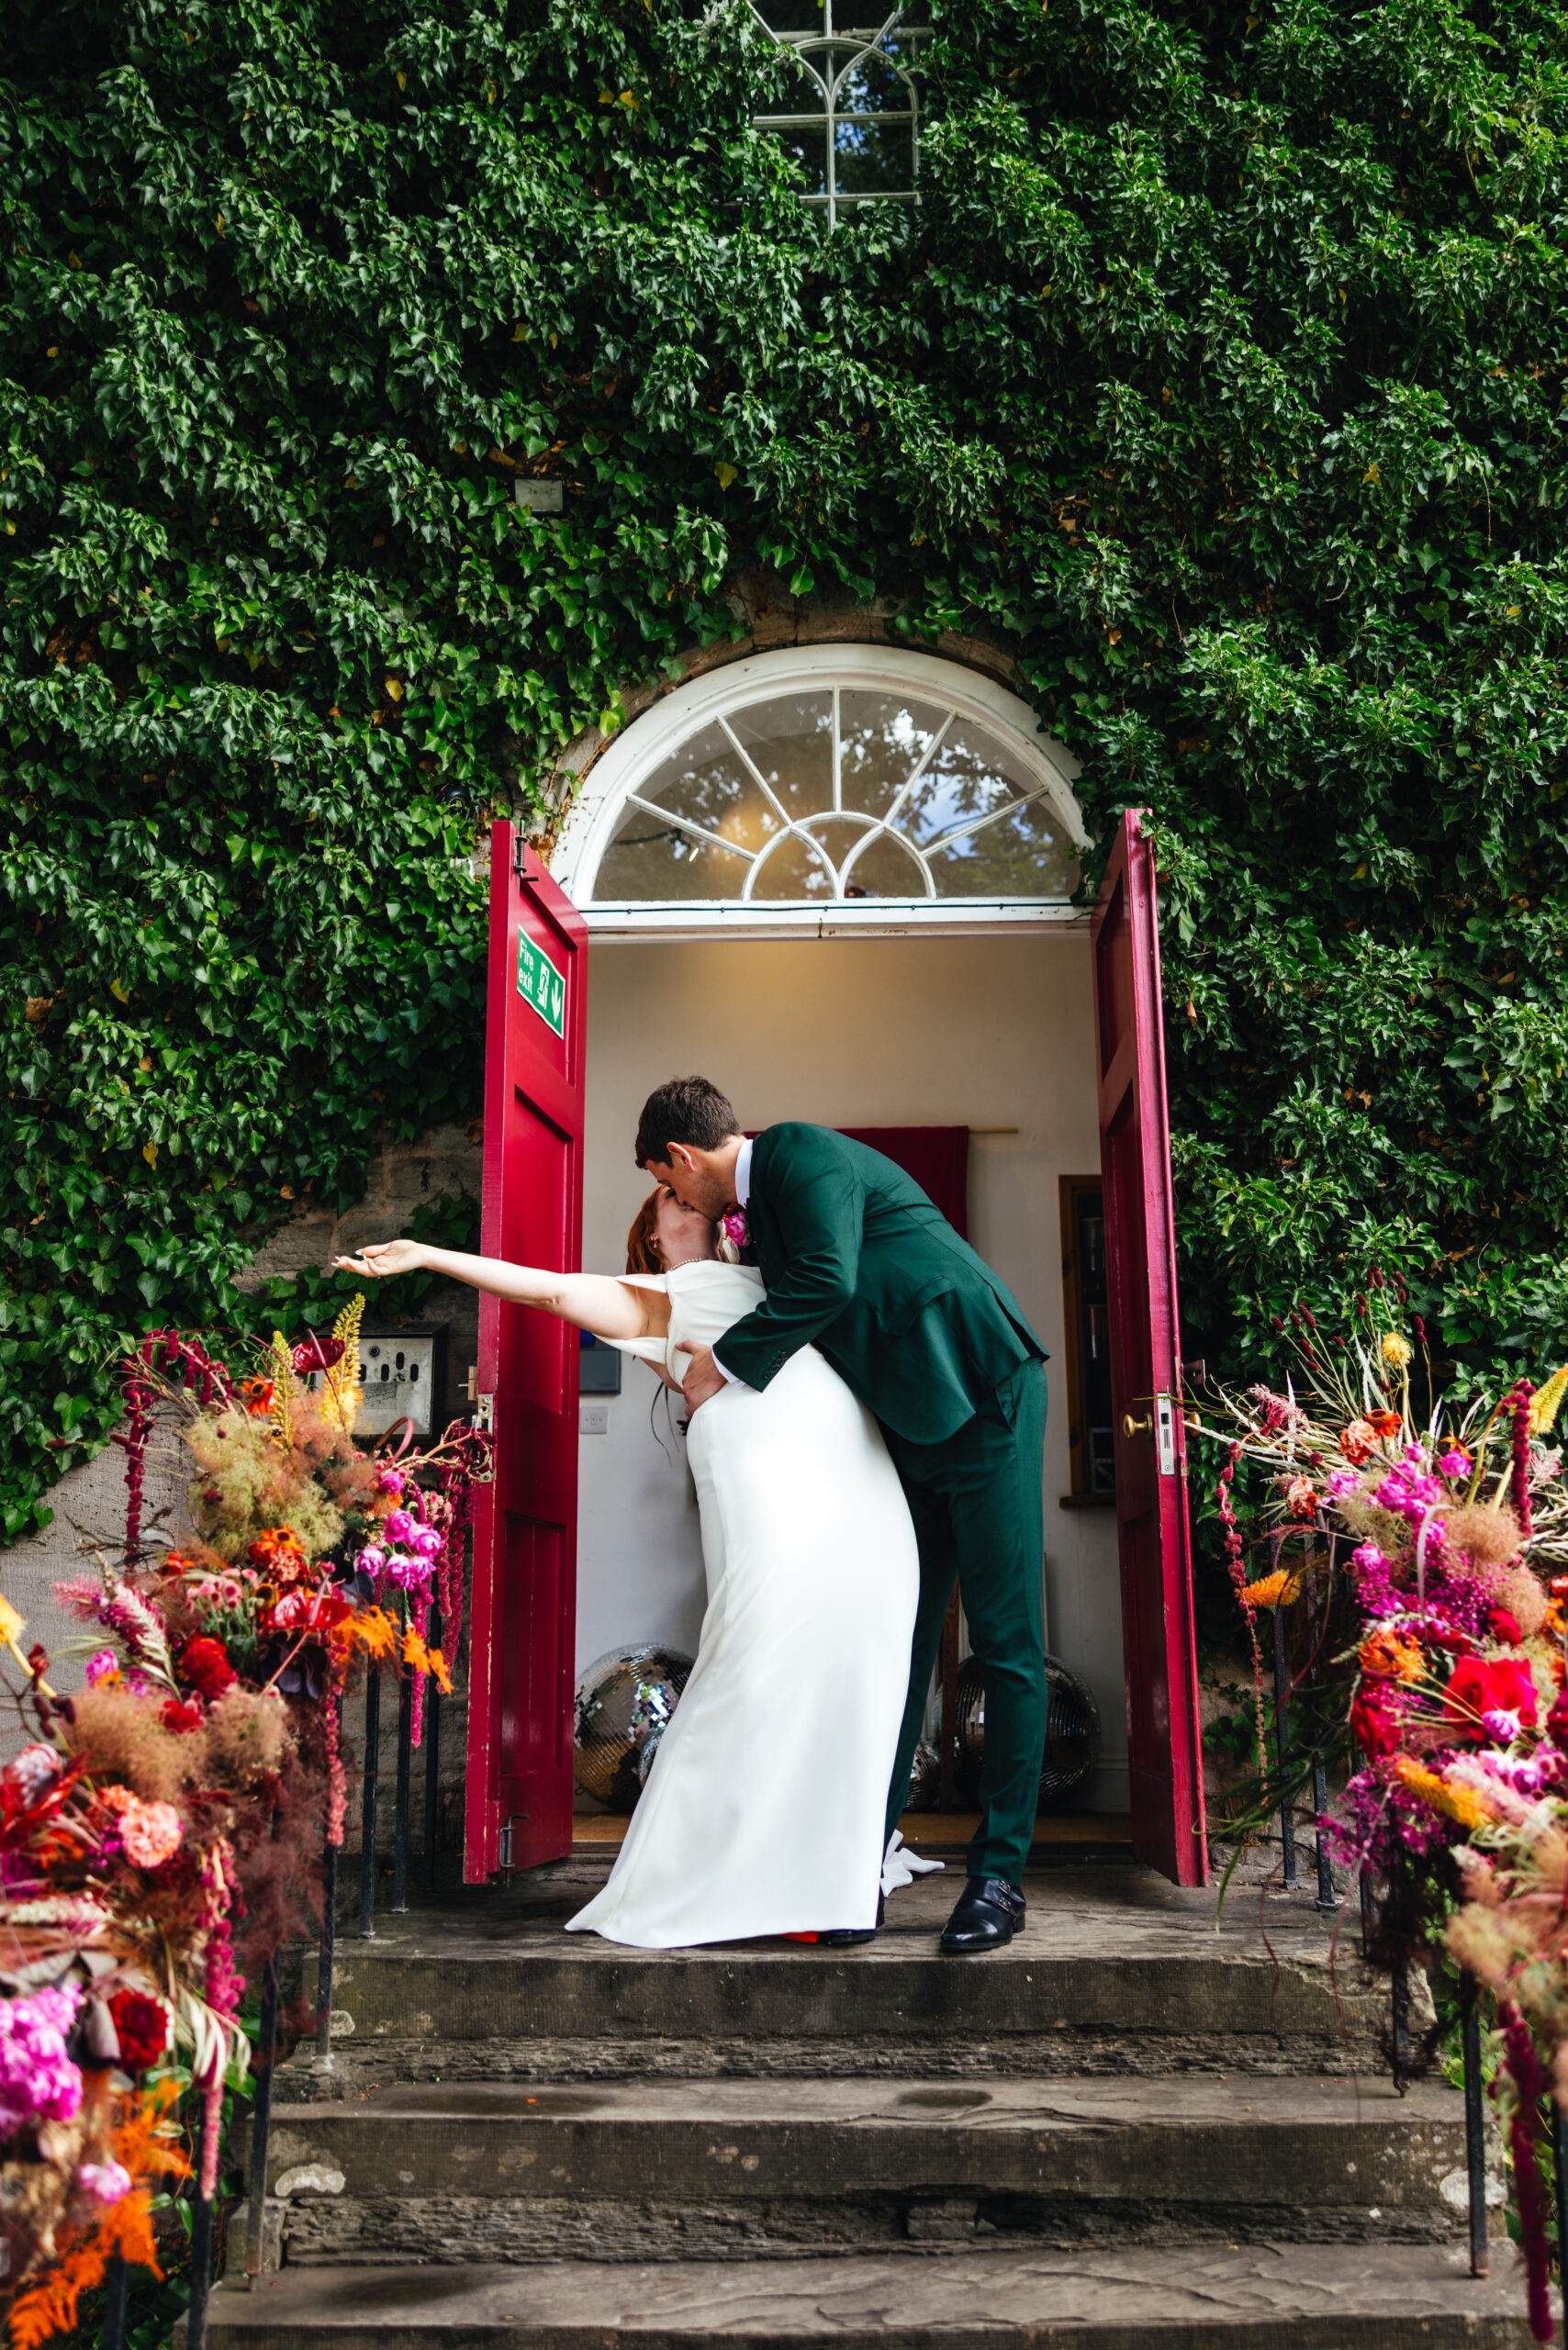 Bride and Groom kissing at the front doors of The Globe in Hay. Surrounded by colourful flowers